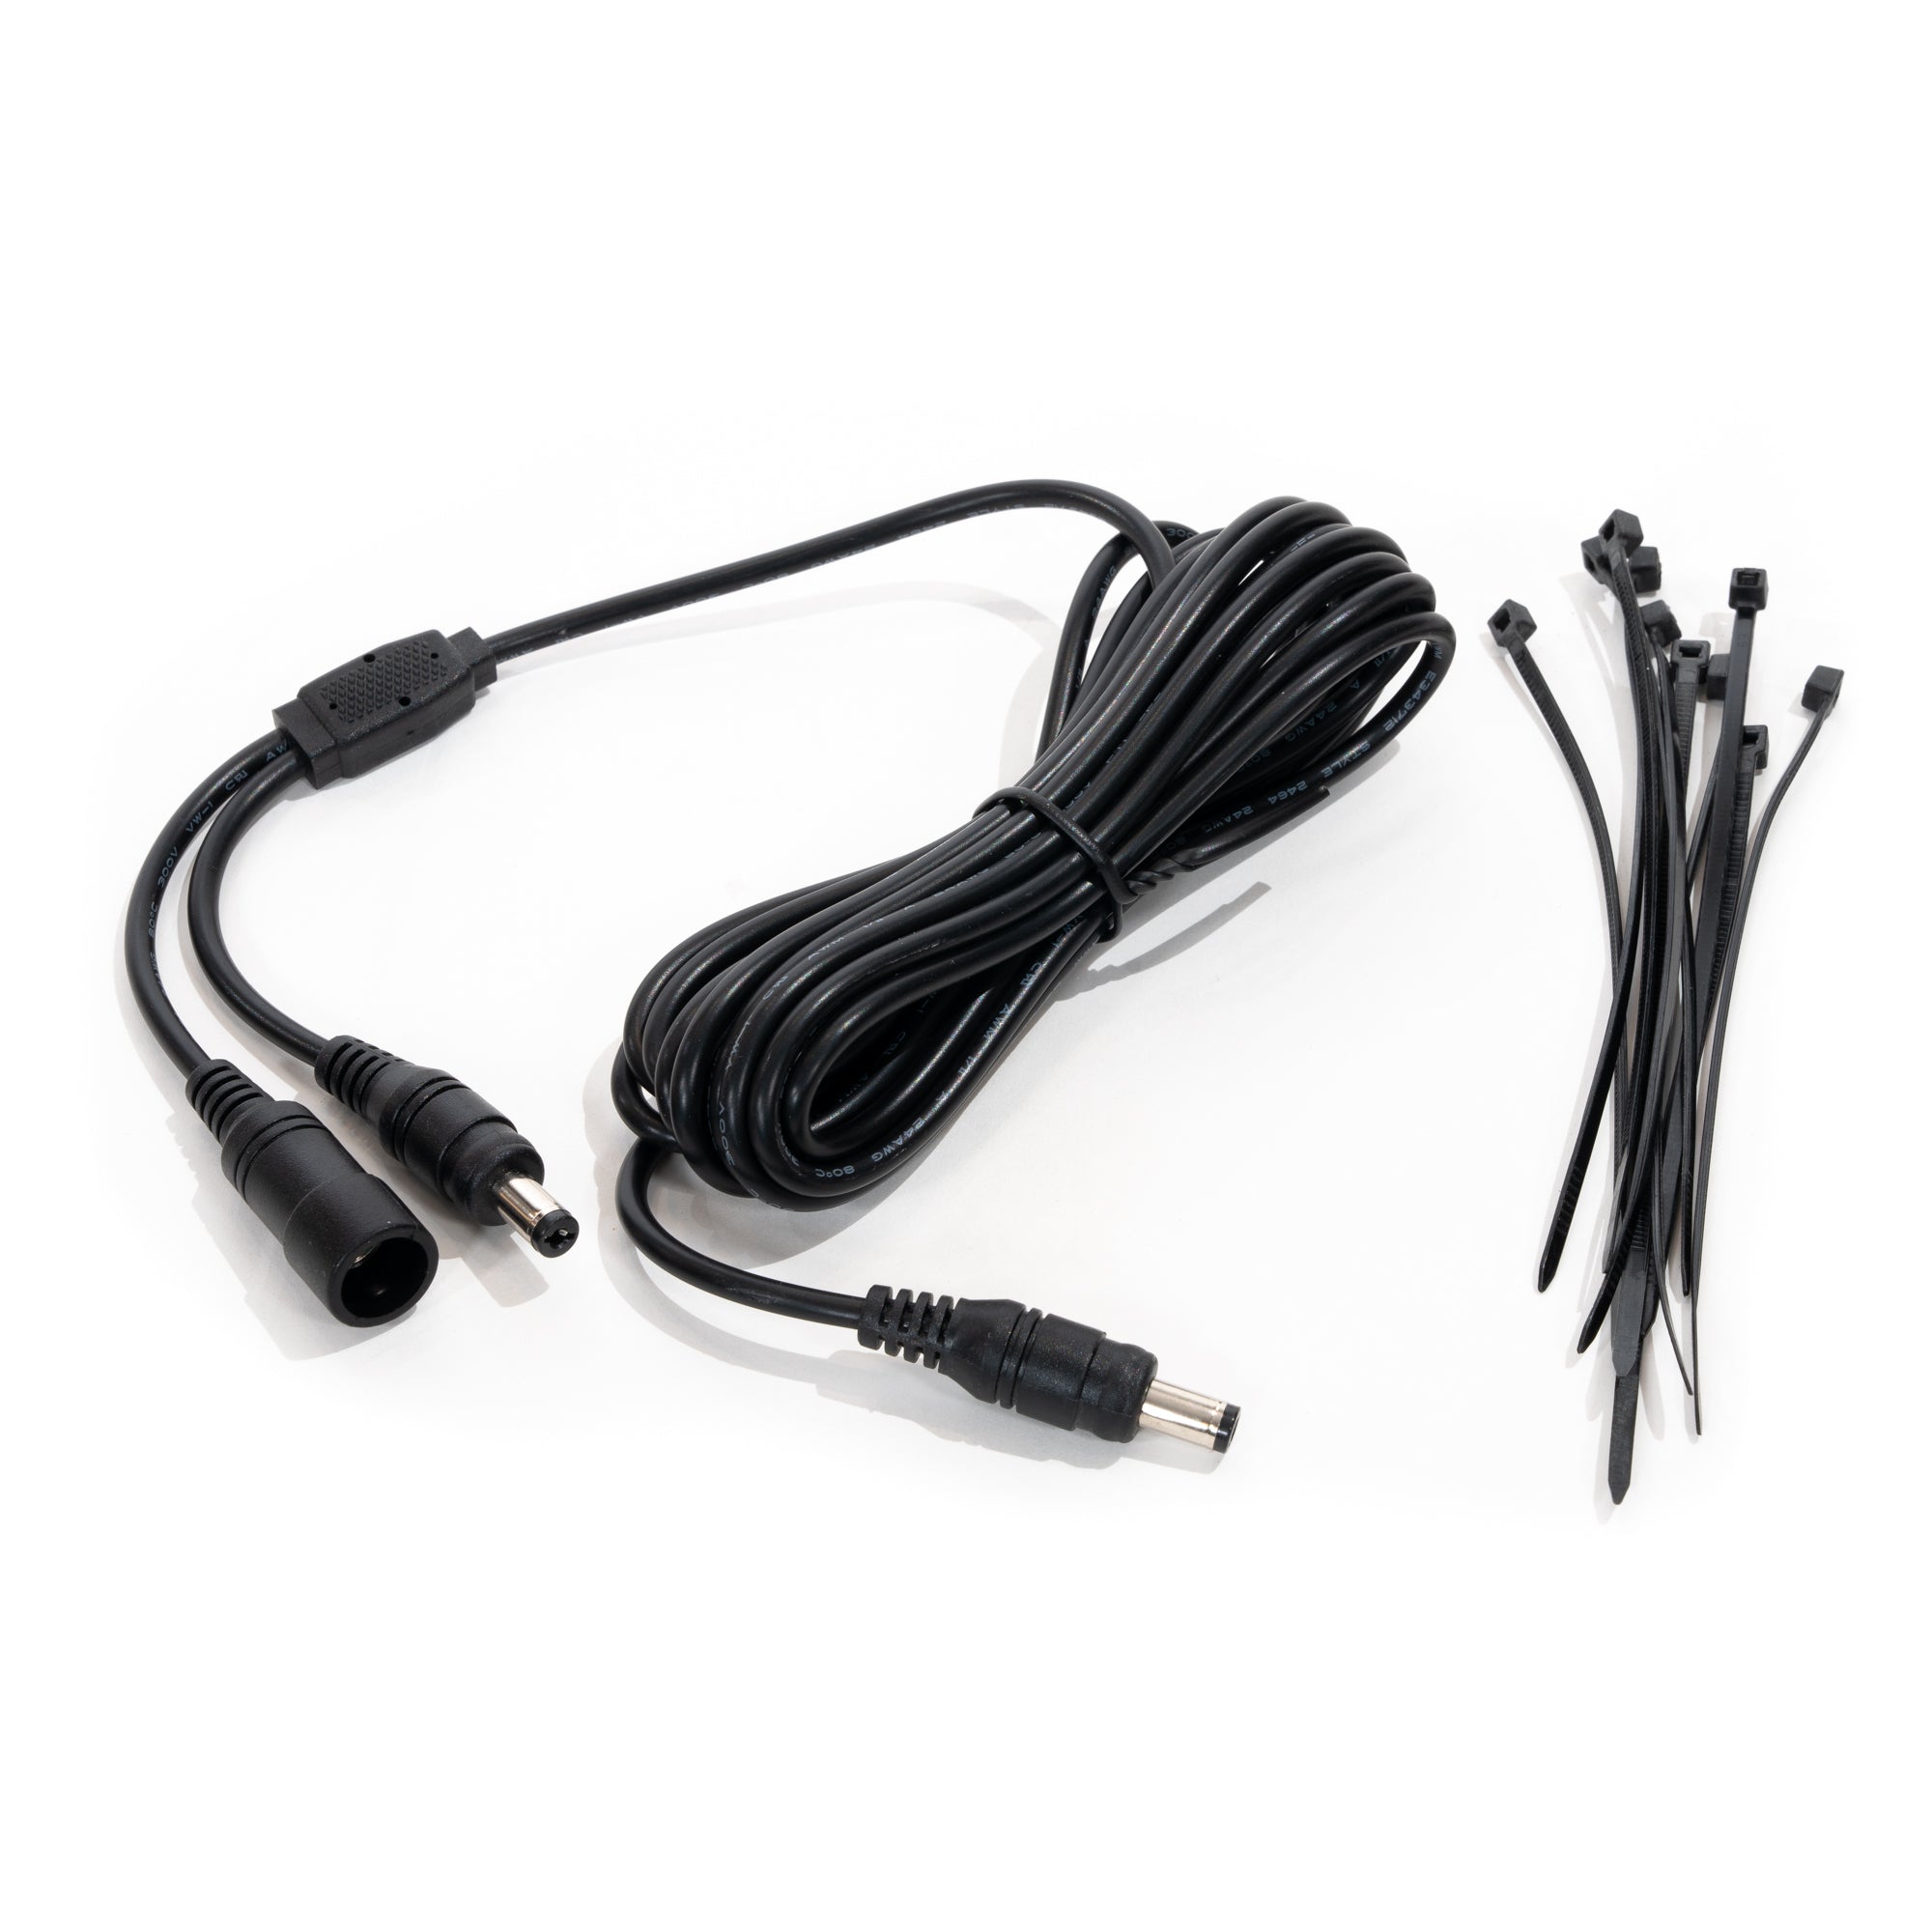 AC Adapter Extension Cord Accessory